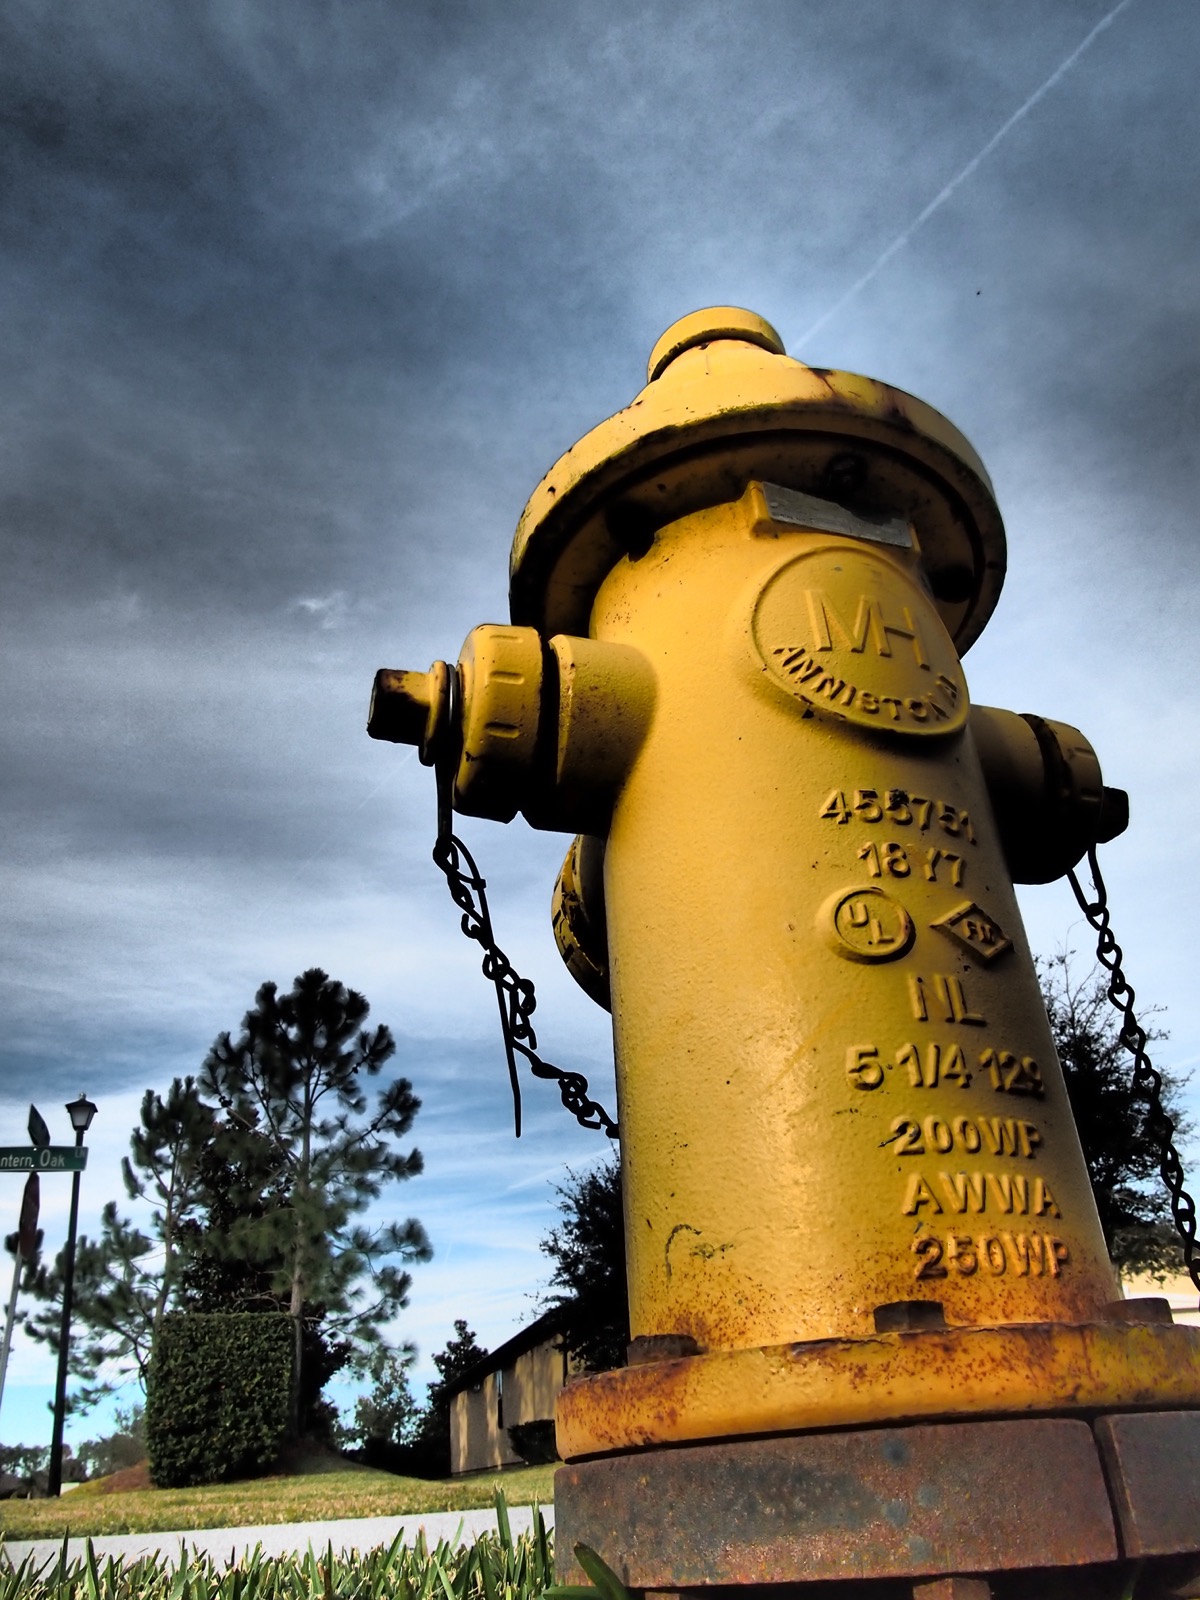 Low angle shot of a yellow fire hydrant against a blue sky with a suburban landscape in the background with a contrasty 